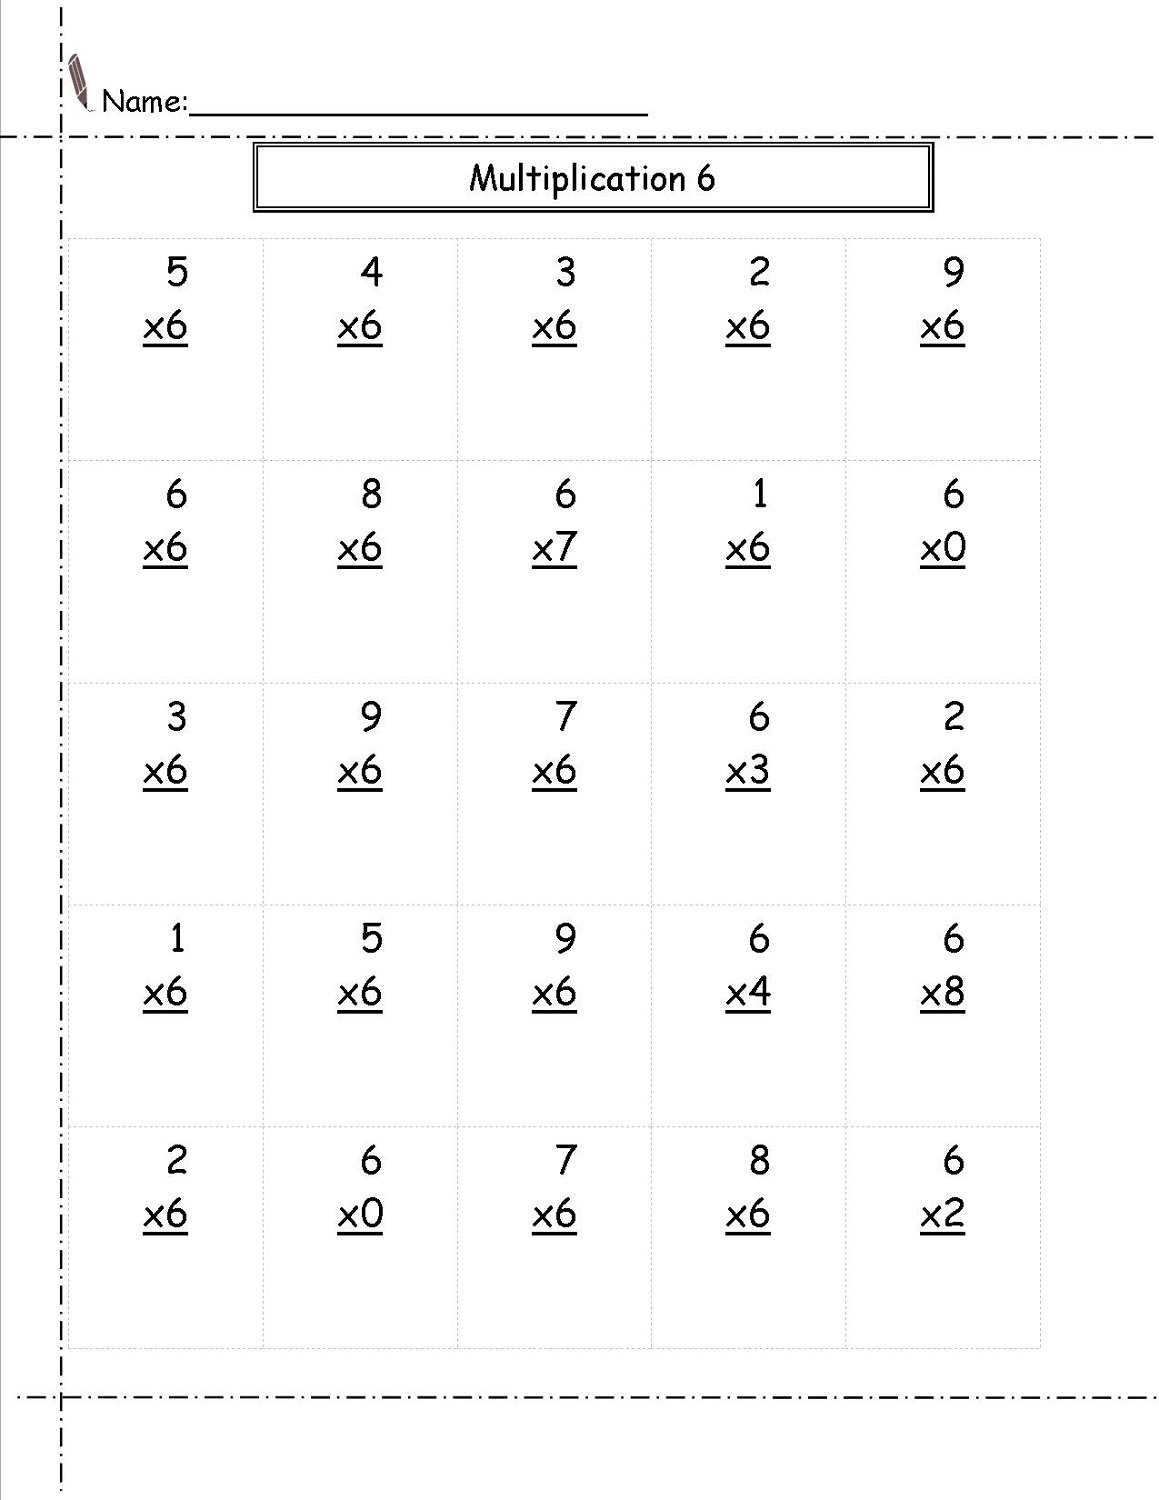 6 times tables worksheets for kids